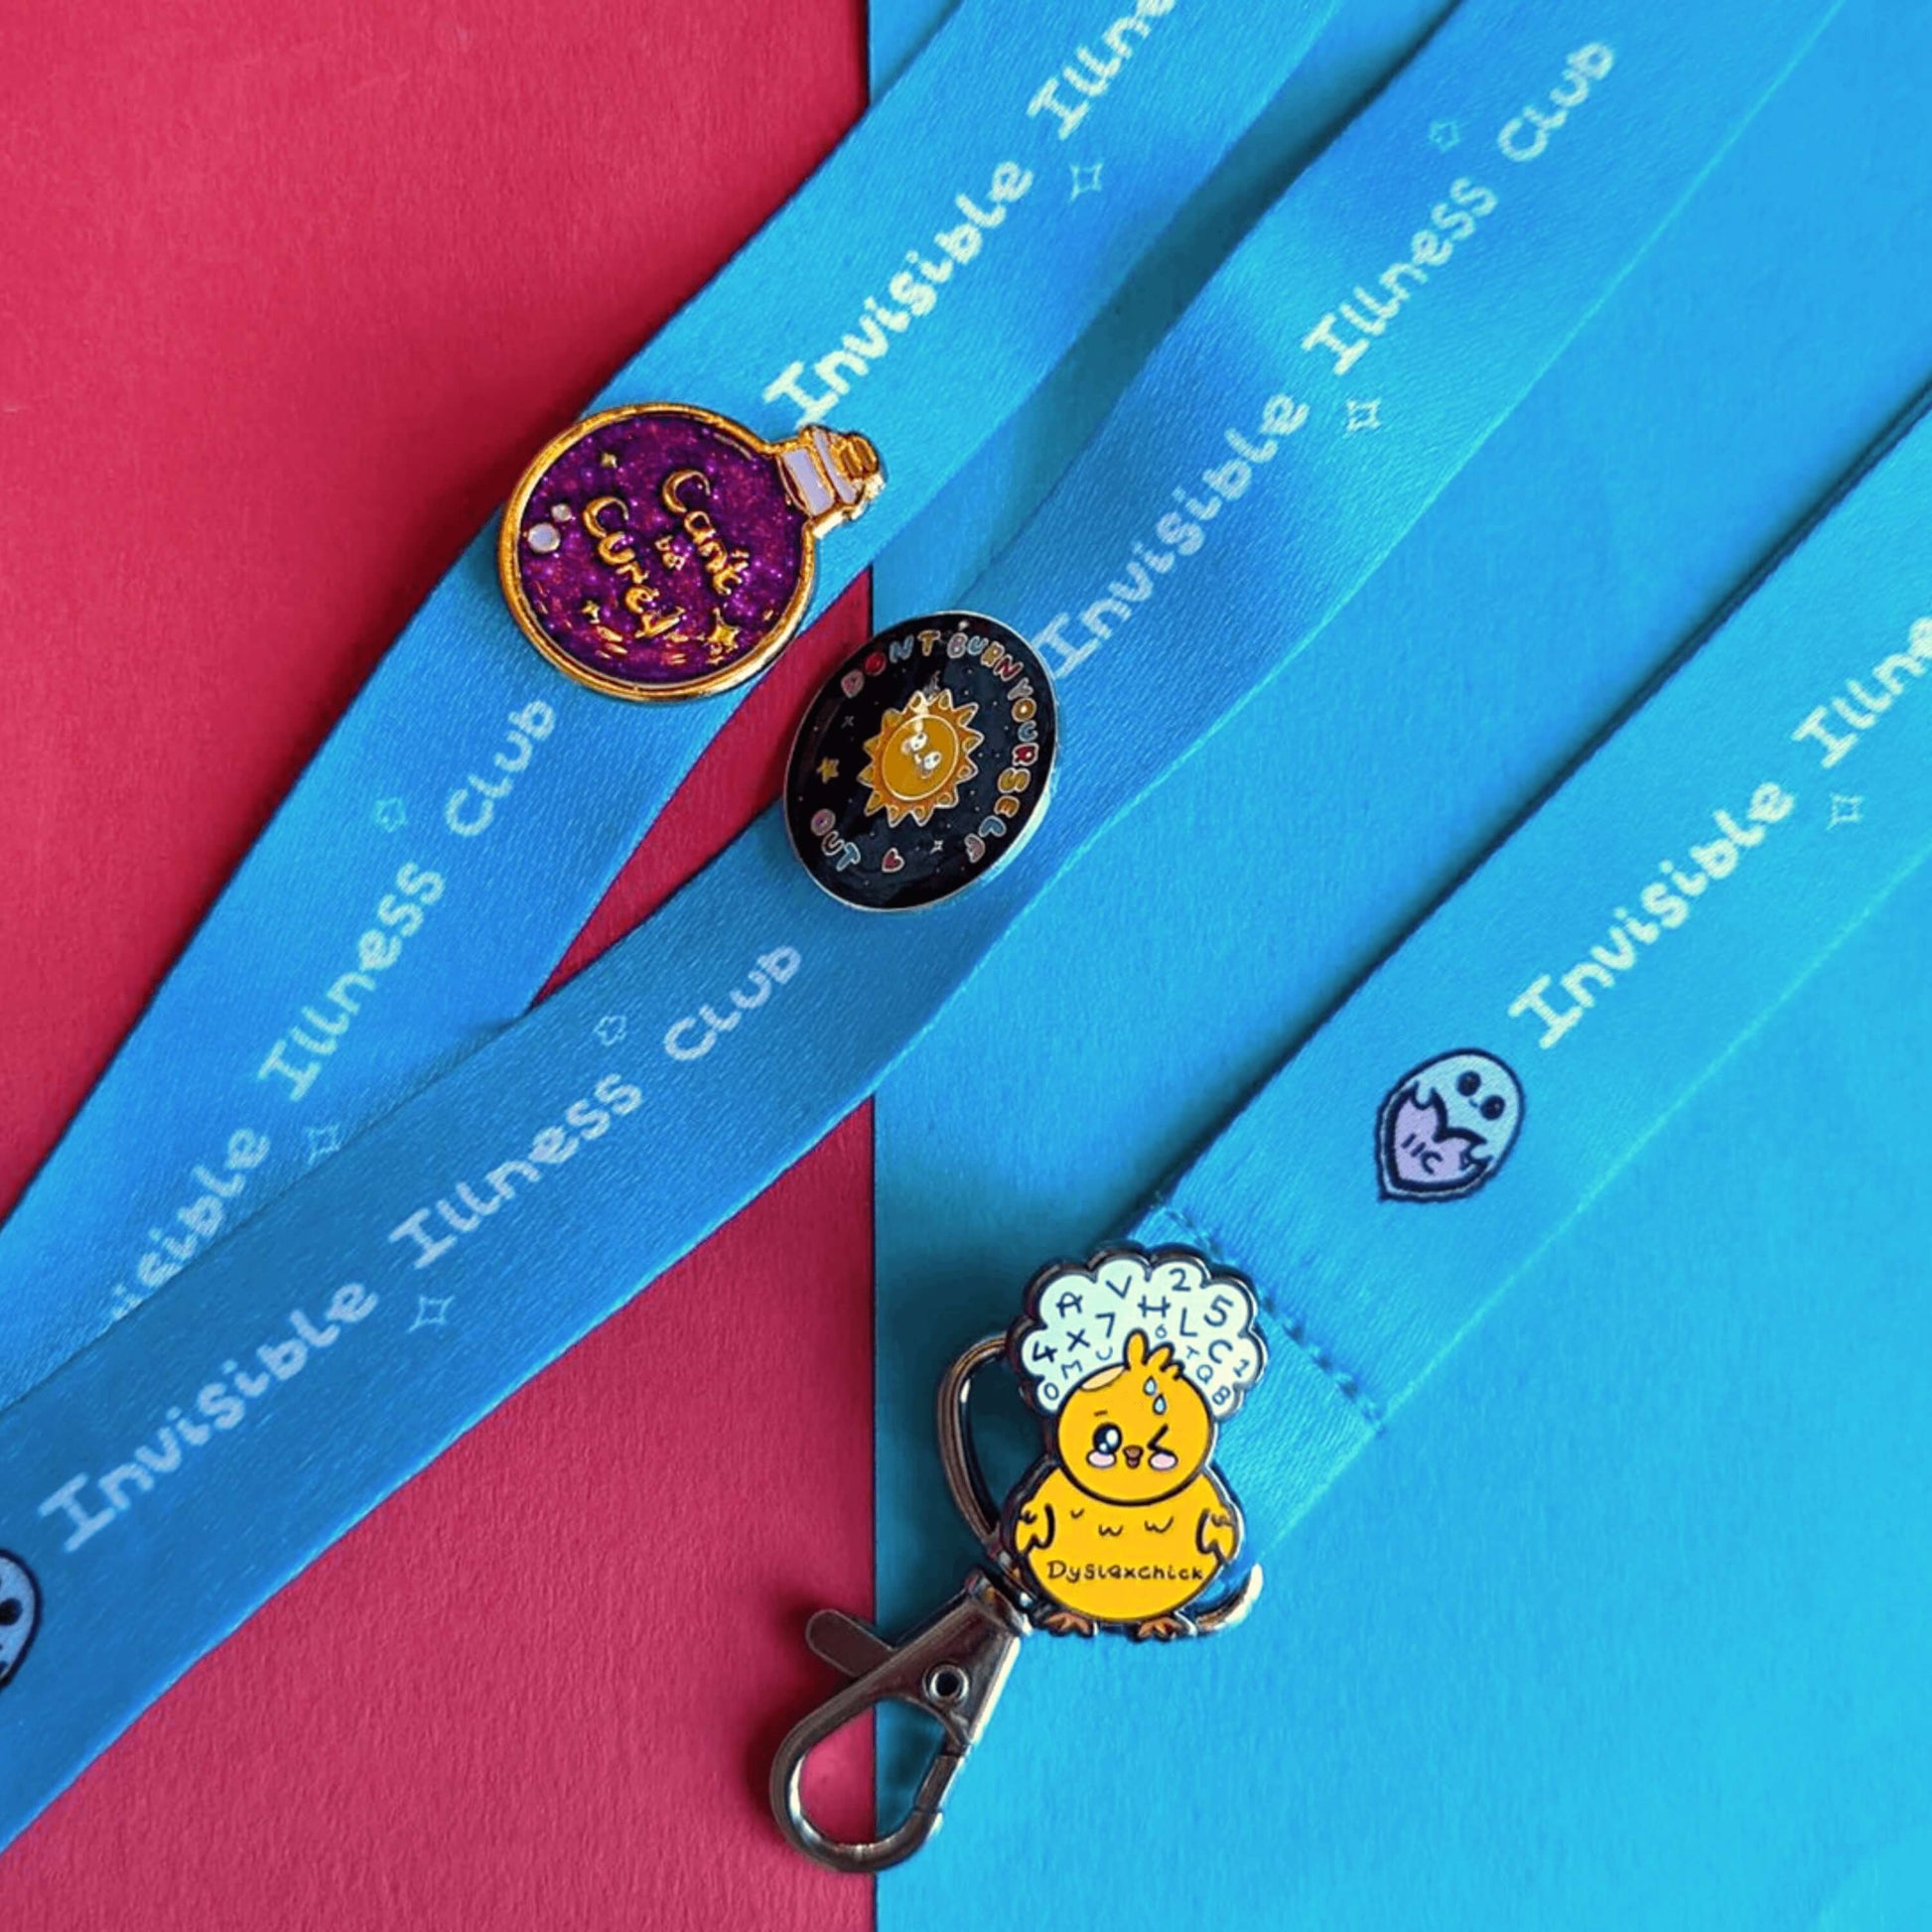 Dyslexia enamel pin of a yellow confused chick with numbers in a cloud above their head, Can't Be Cured Purple and Gold glitter Potion Bottle Enamel Pin and Don't Burn Yourself Out Sunshine enamel pin attached to Invisible Illness Club Lanyard. The background is blue and red.